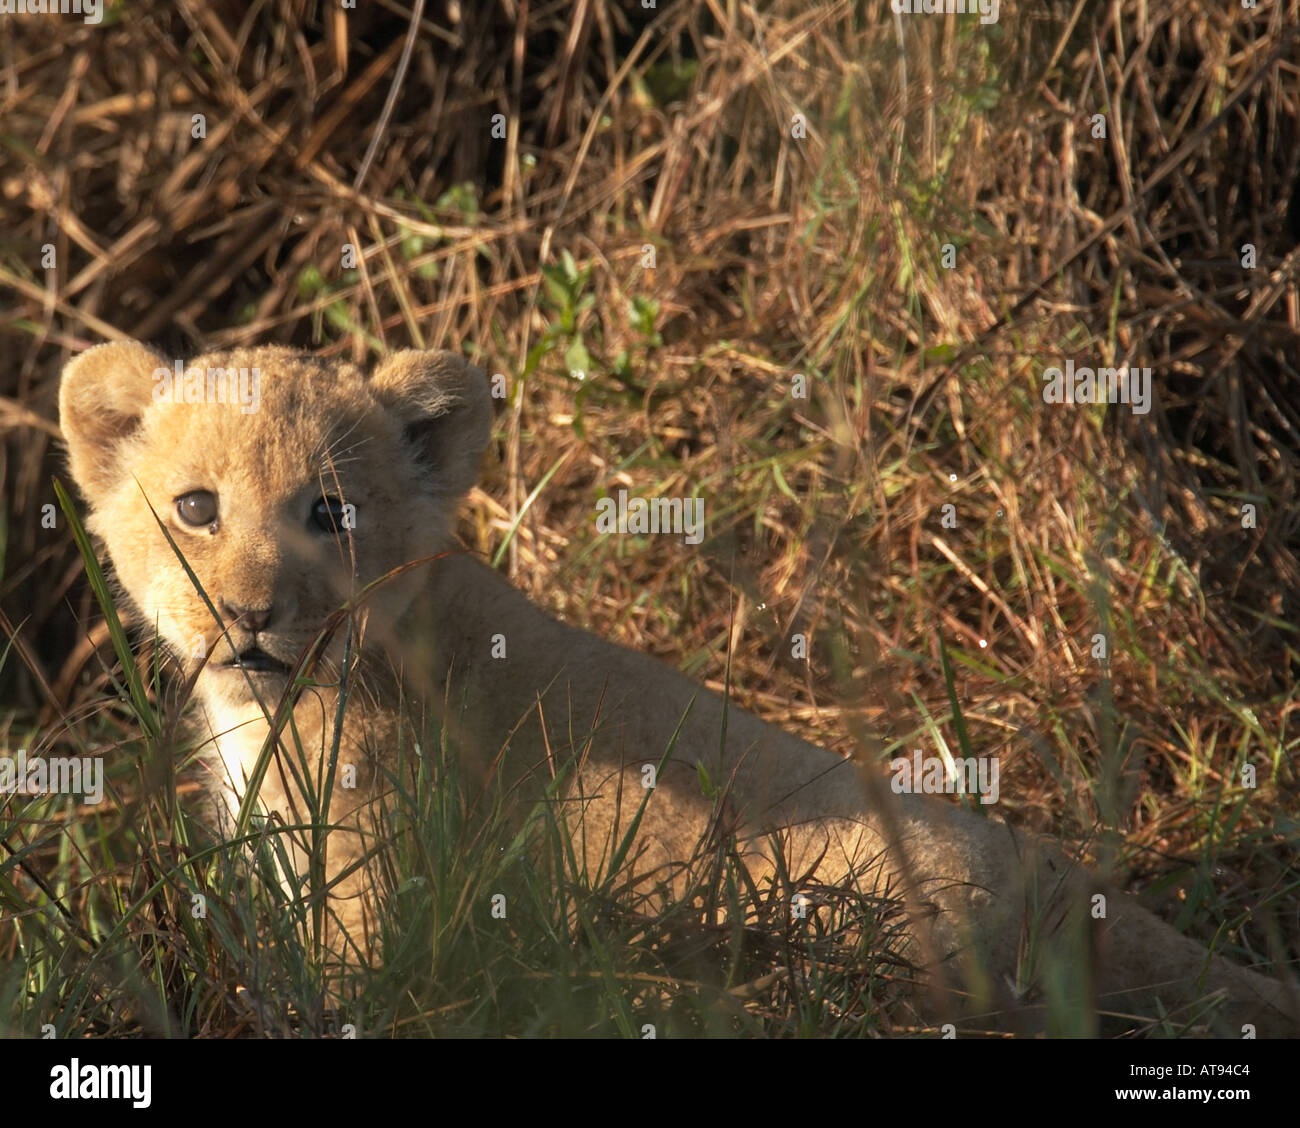 Blue eyed lion cub perring through the grass and looking cute Stock Photo